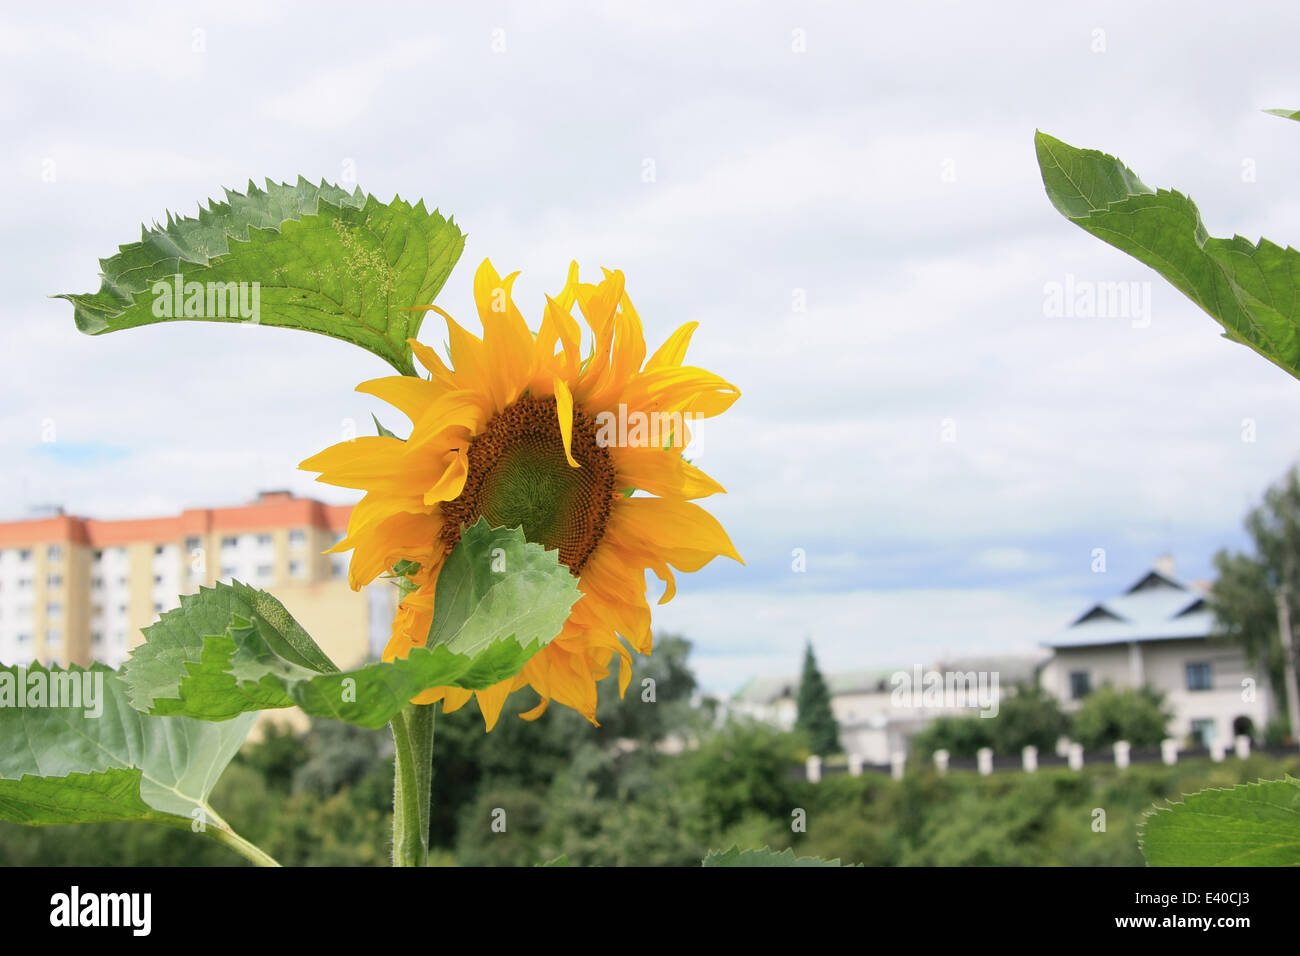 Sunflower with houses in the background Stock Photo